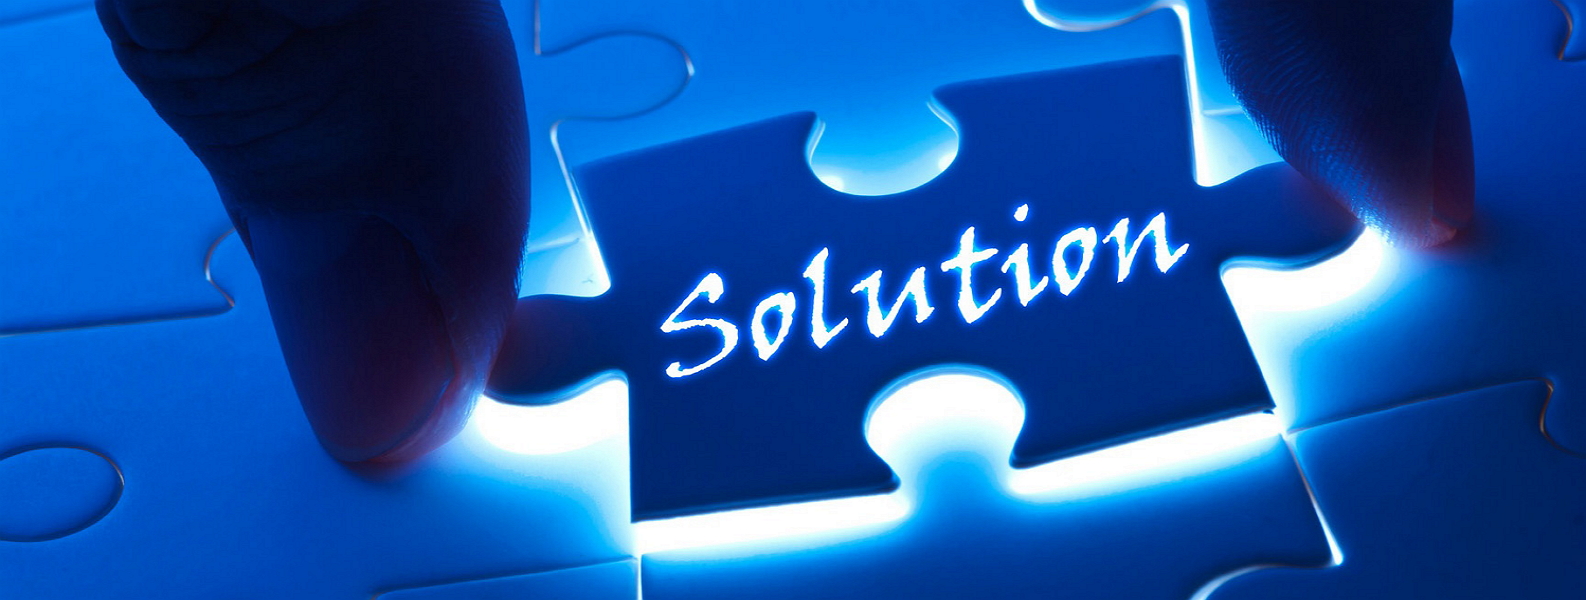 ITFiction can find a solution for your Business and Ideas